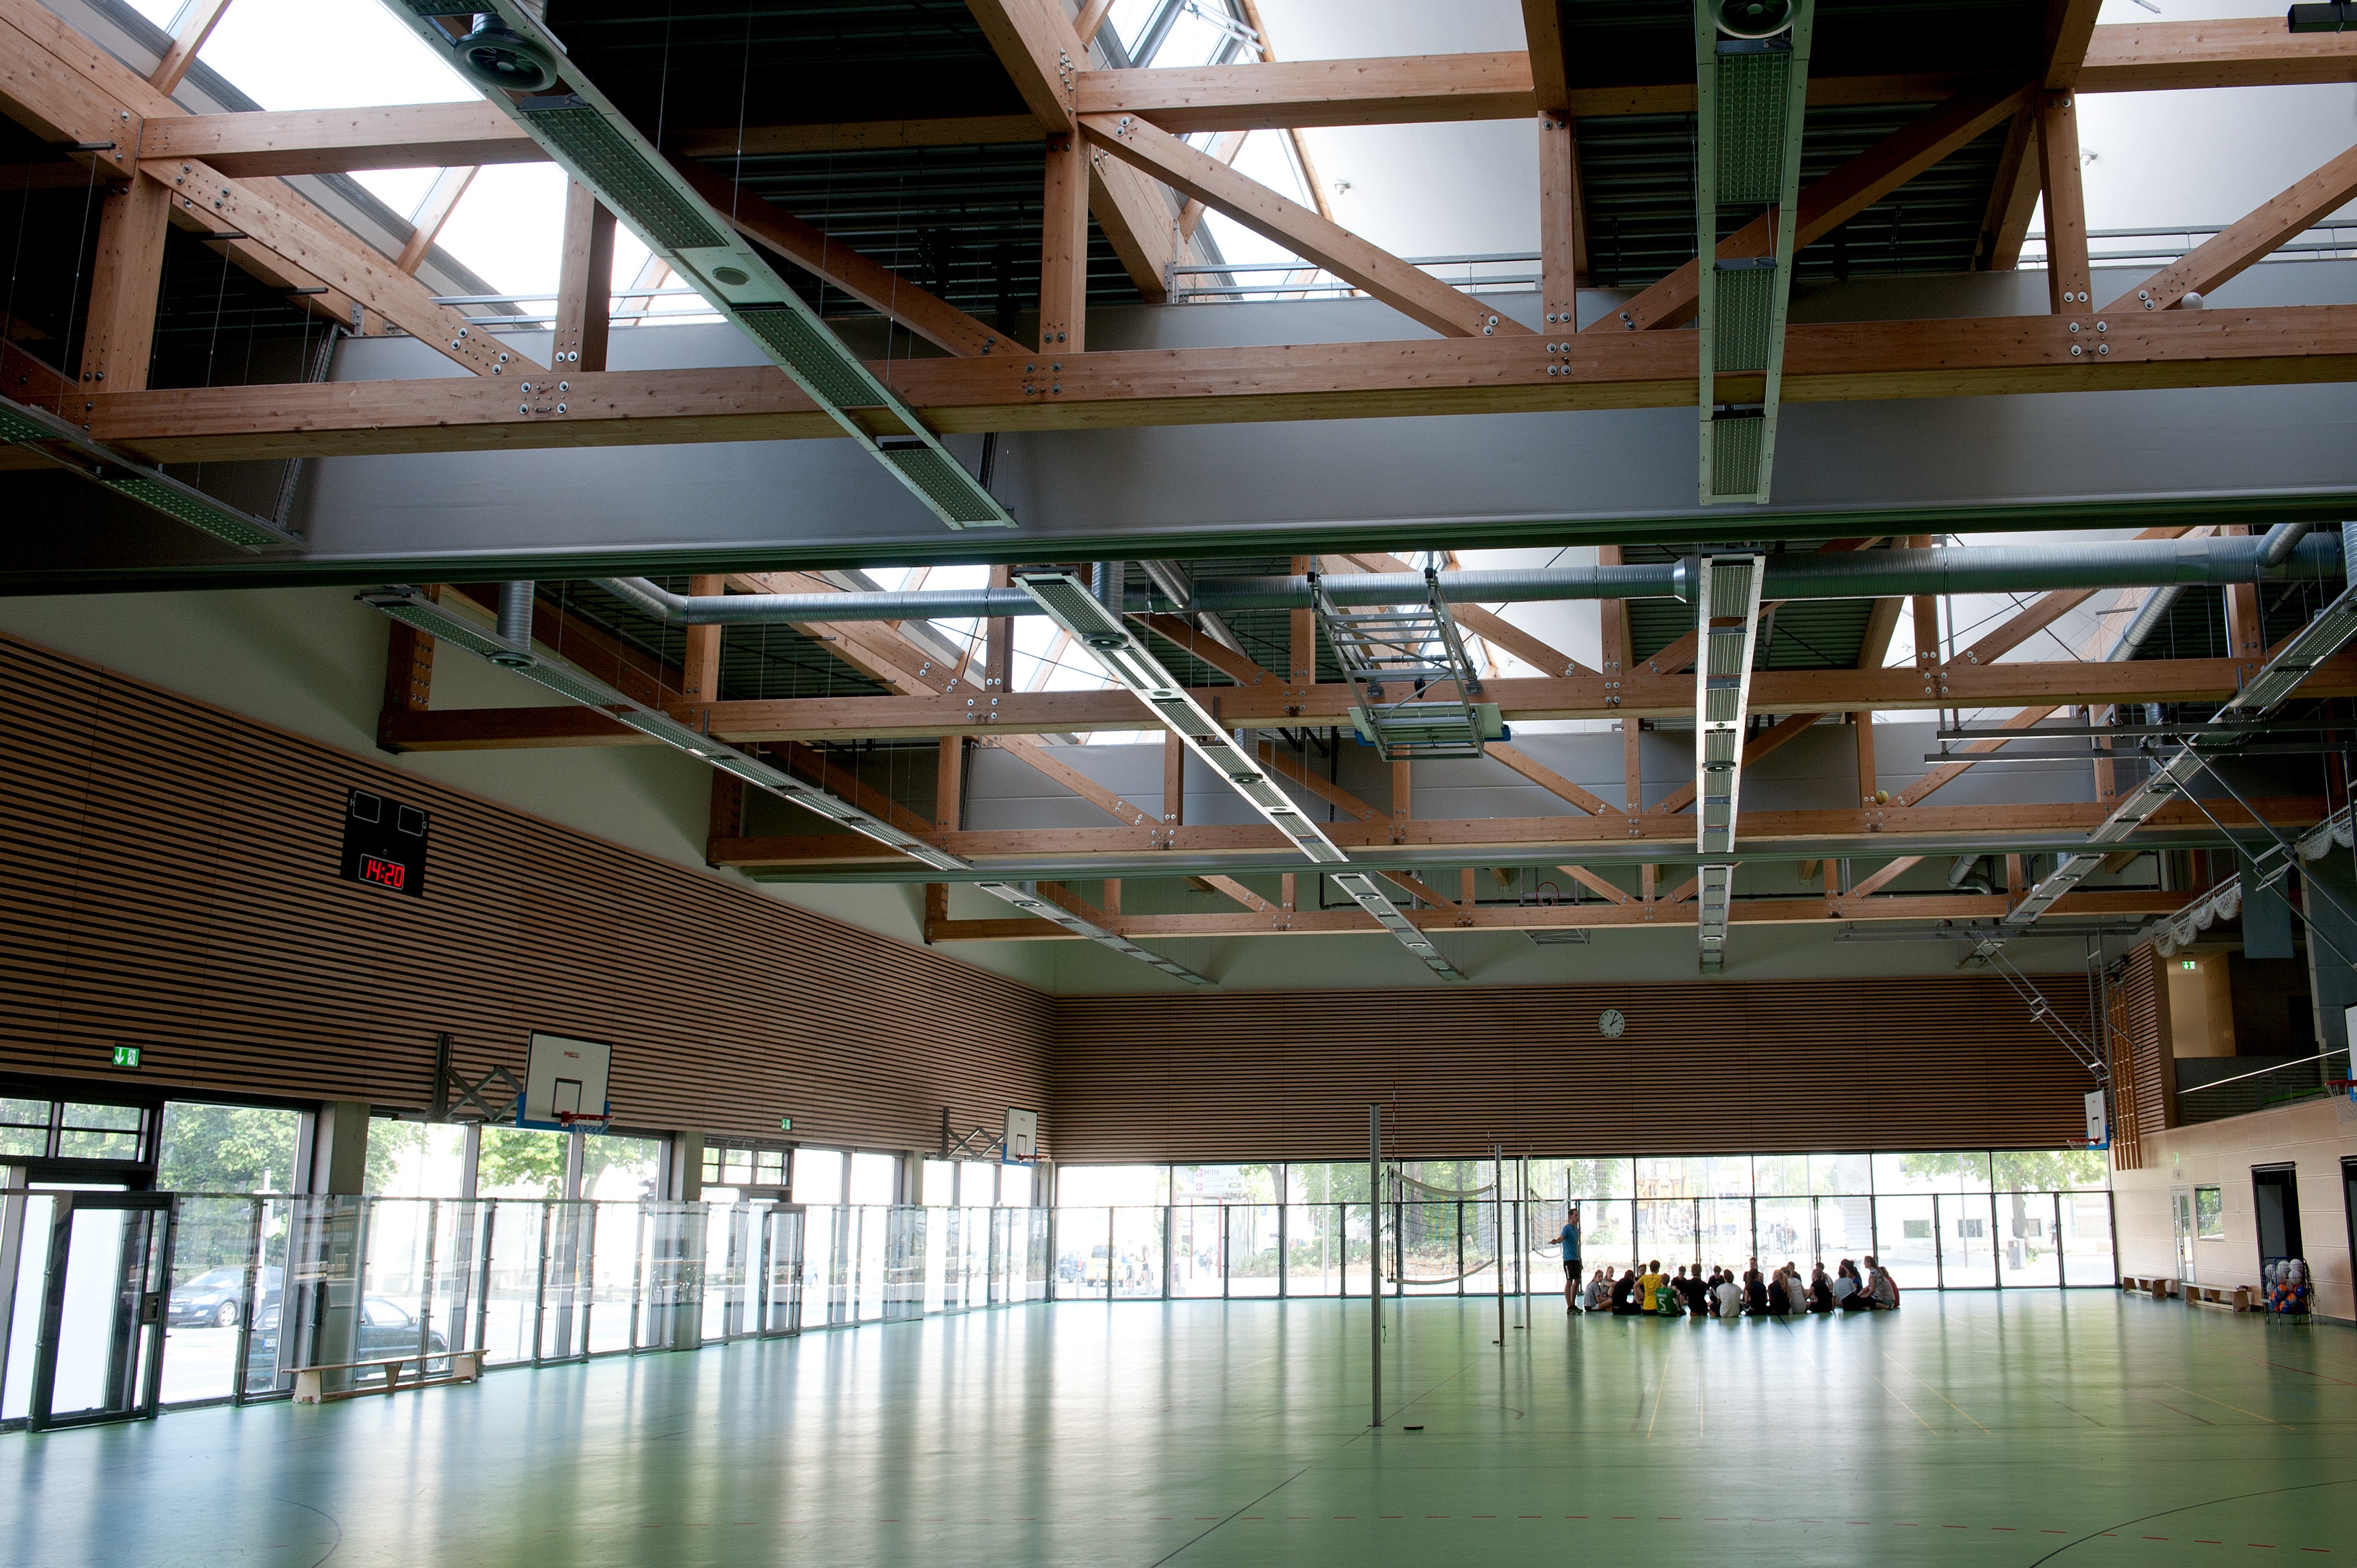 The sports hall of the New School